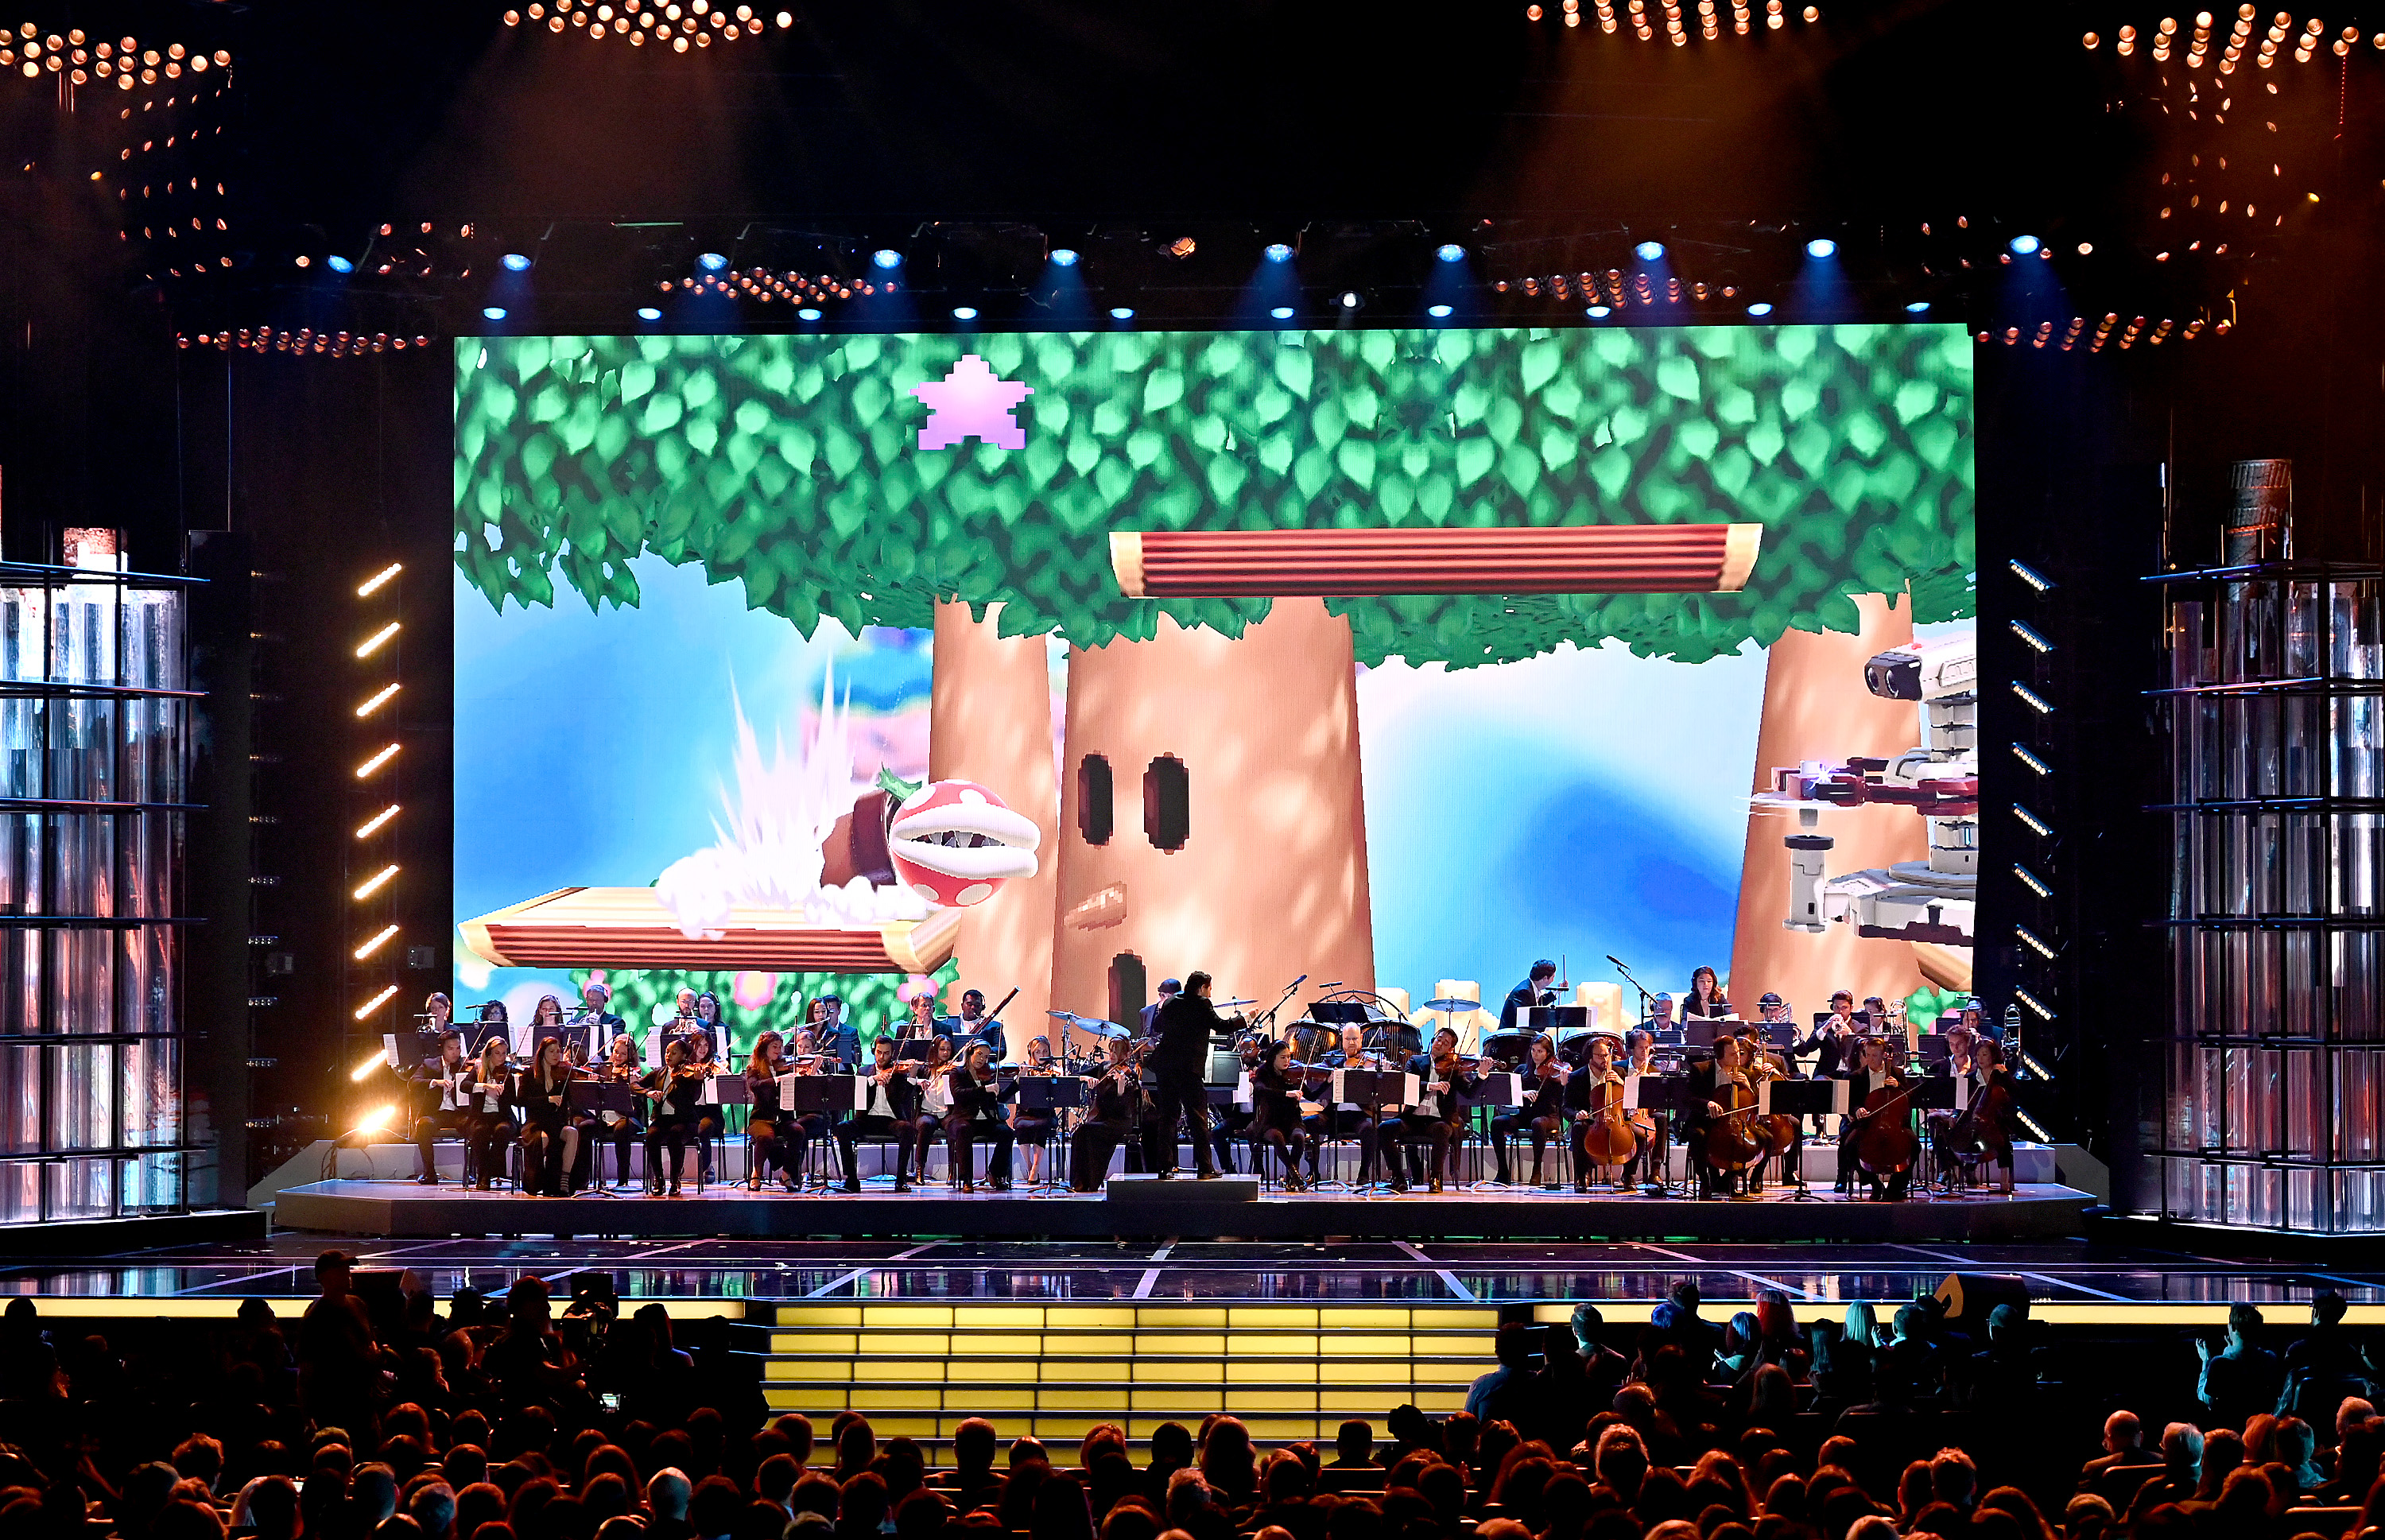 The Game Awards 10-Year Concert: June 25 at Hollywood Bowl 